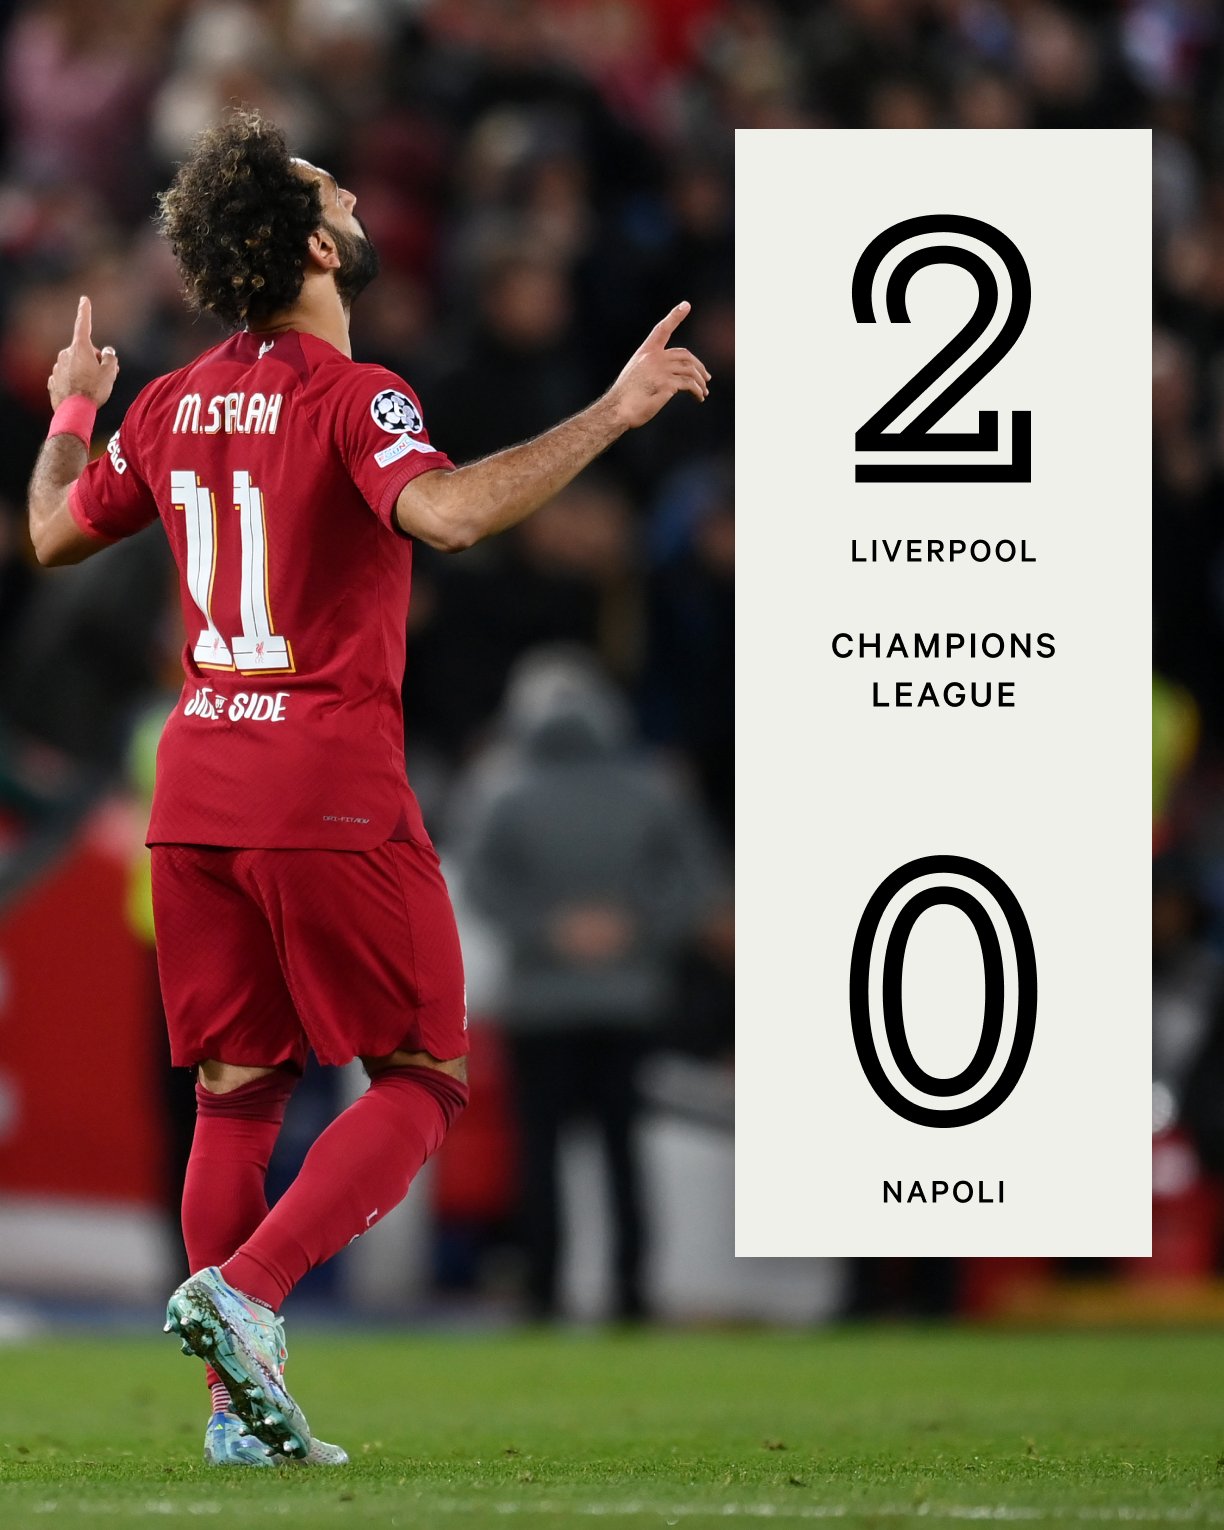 The Athletic | Football "FT: Liverpool 2-0 Napoli 🔴 85': Salah 🔴 90+8': Nunez Napoli lose their first game since April as goals Mohamed Salah and Darwin Nunez see